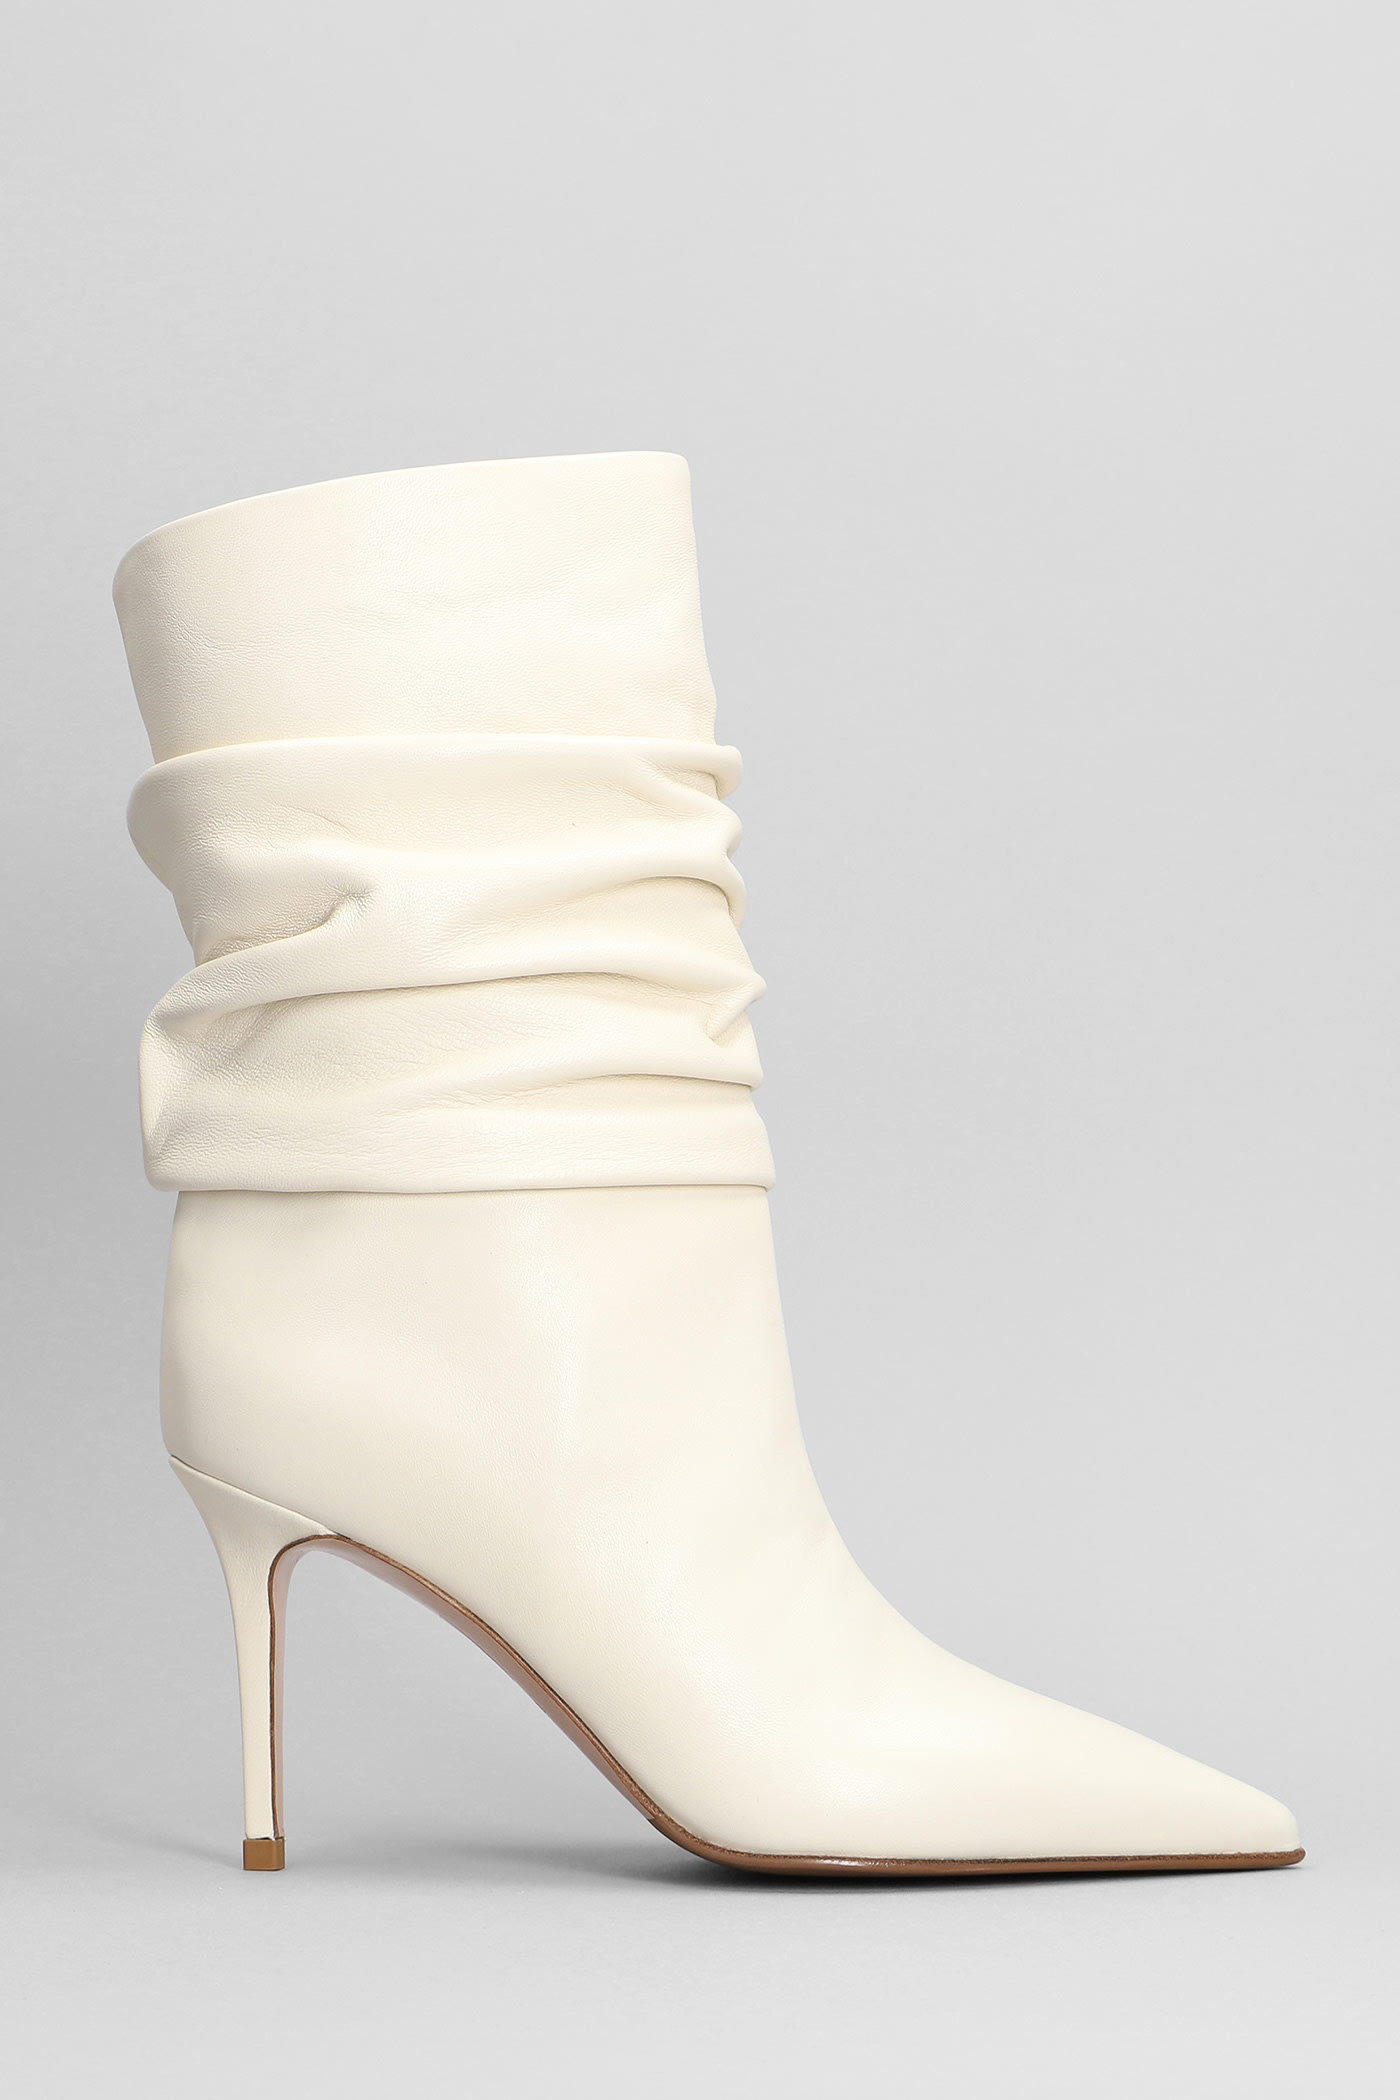 LE SILLA EVA 90 HIGH HEELS ANKLE BOOTS IN BEIGE LEATHER